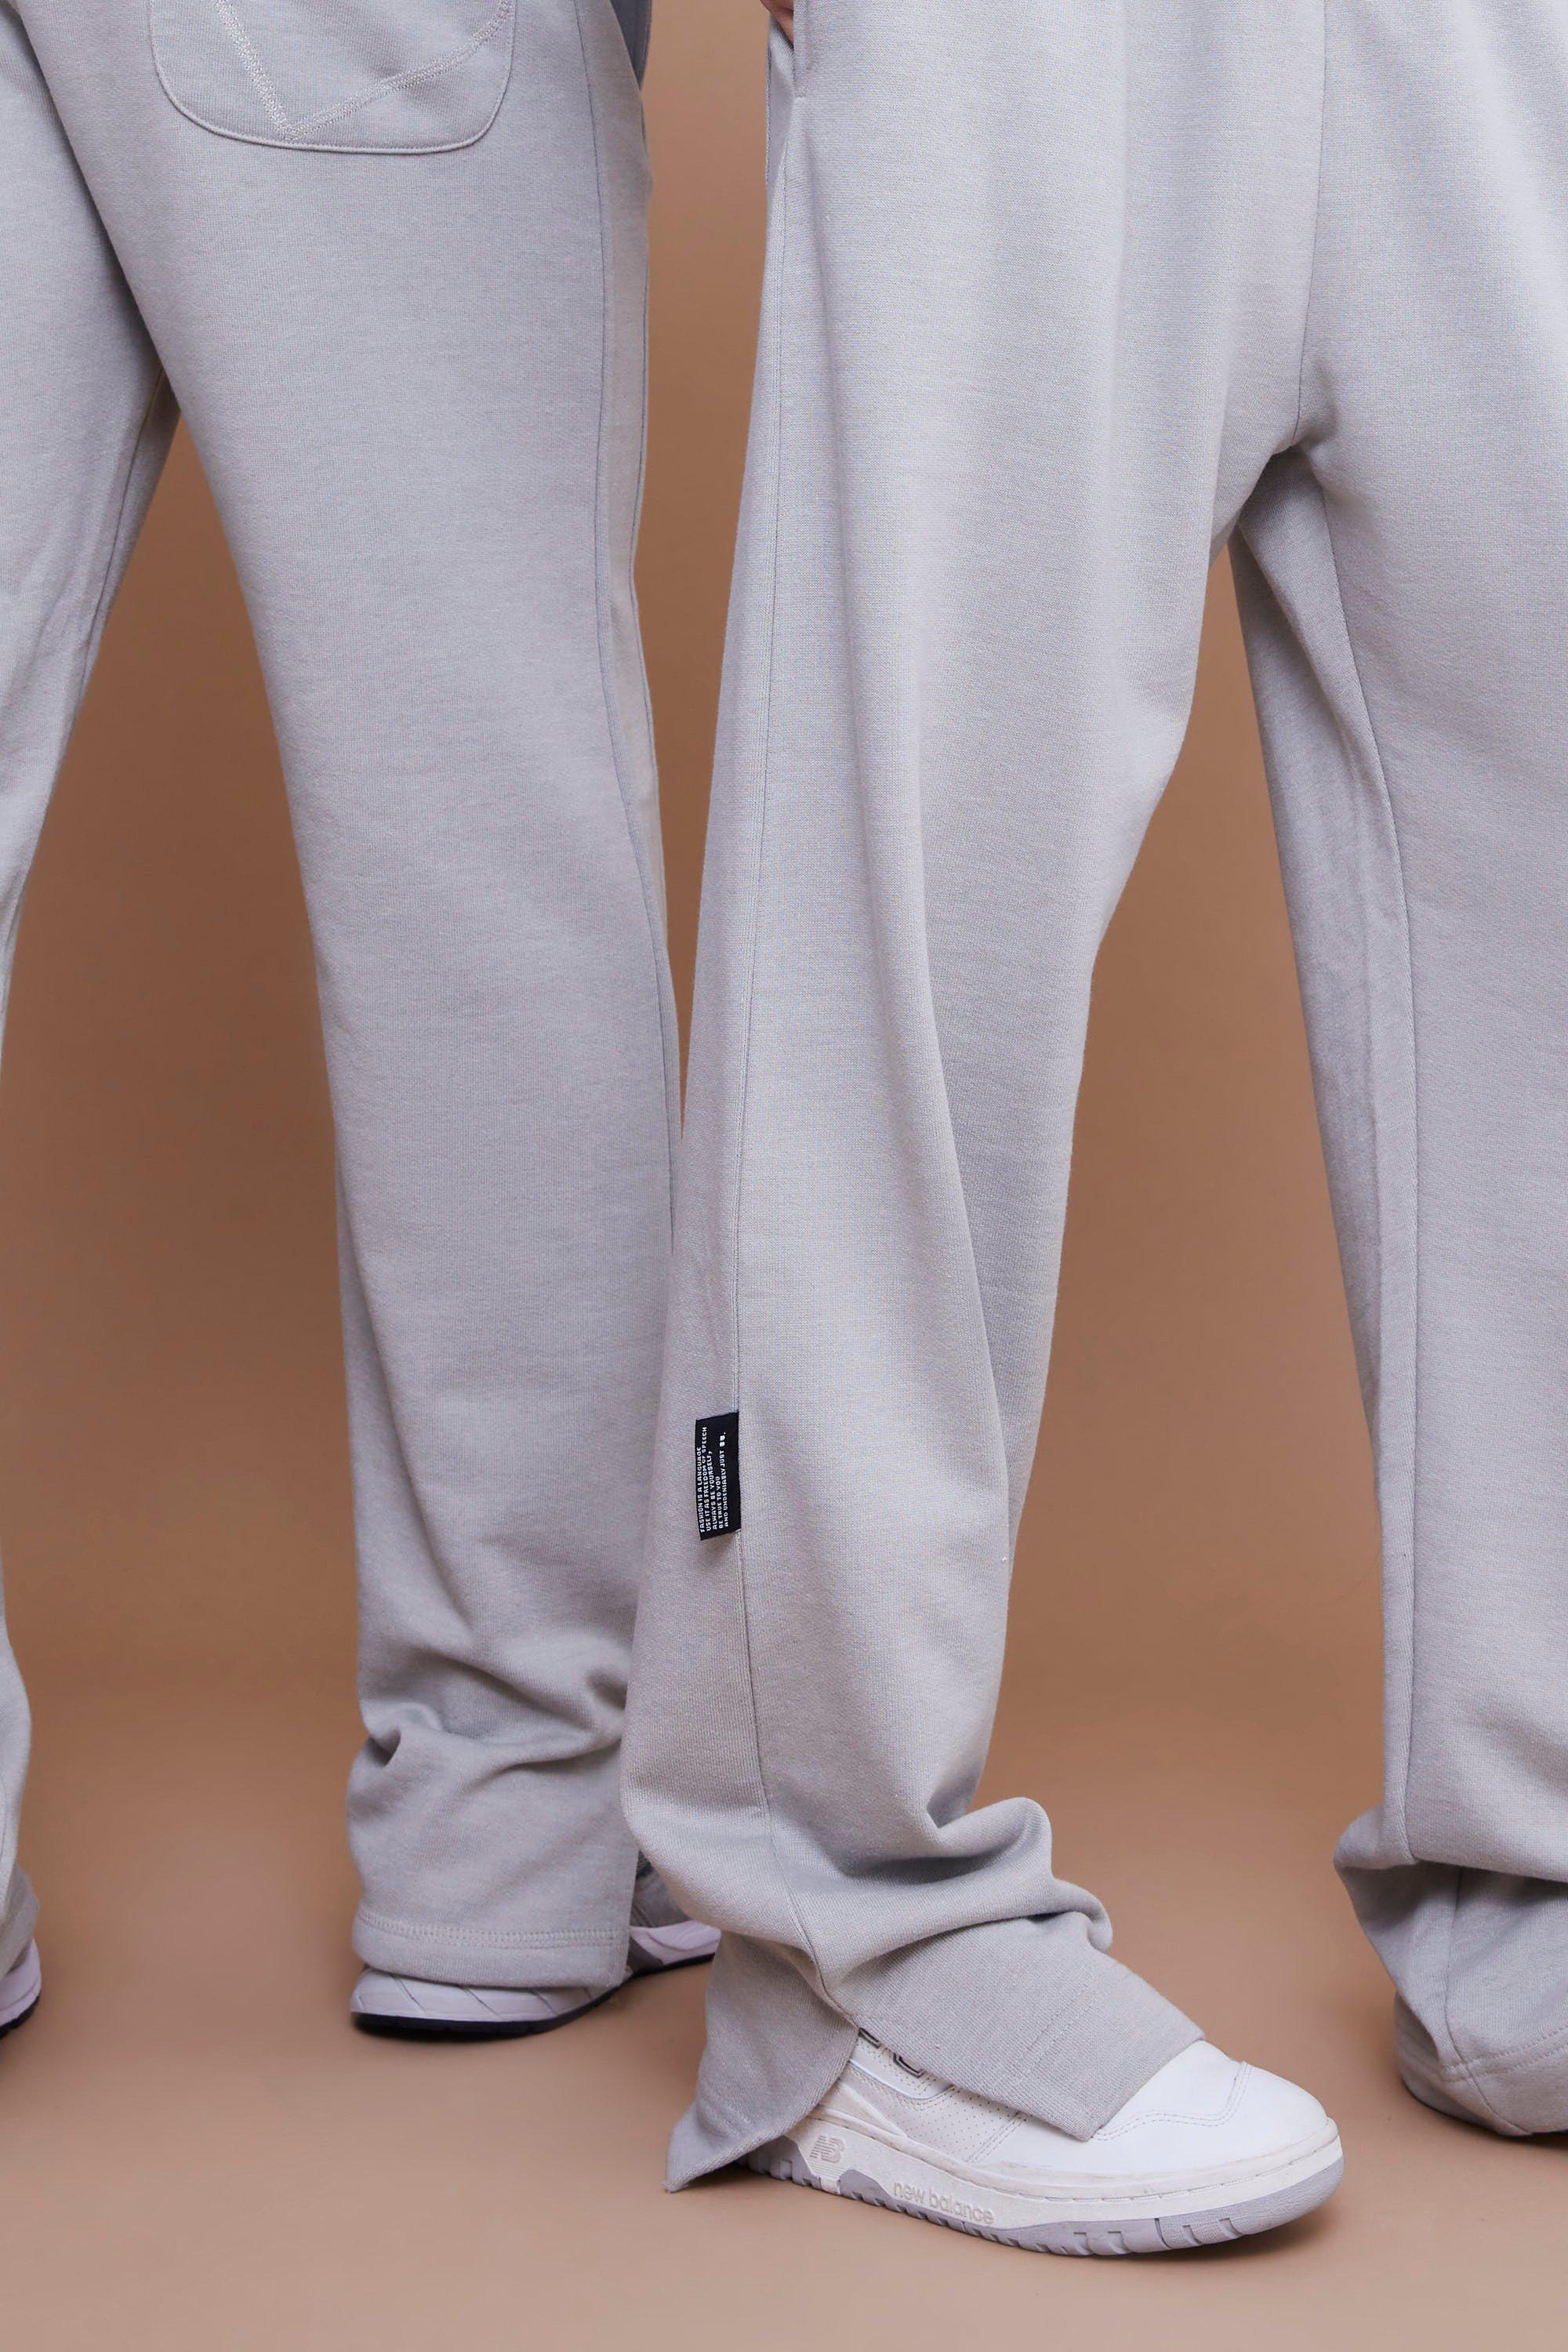 Men’s Heavyweight Relaxed Fit Sweatpants